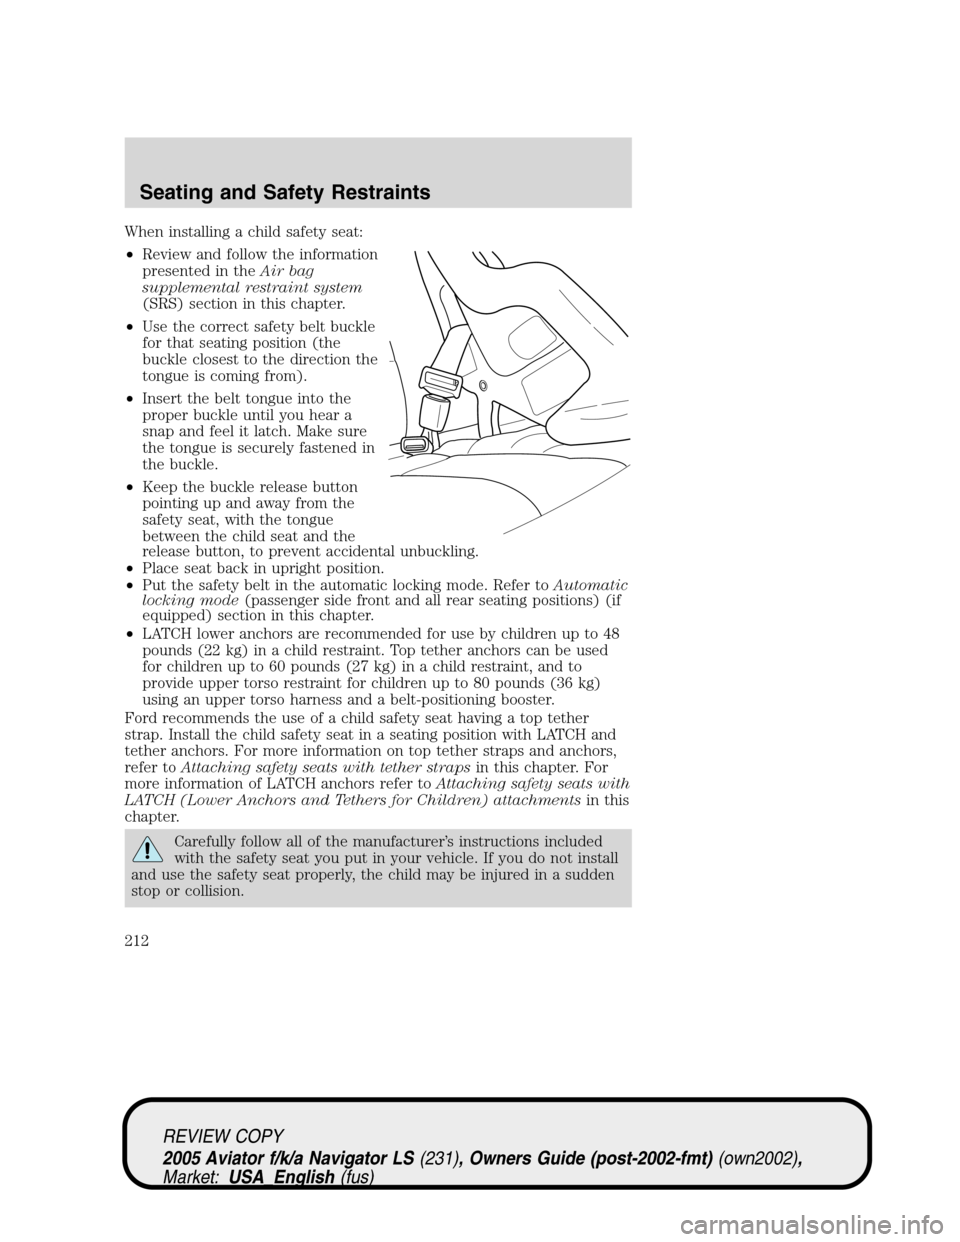 LINCOLN AVIATOR 2005 Owners Manual When installing a child safety seat:
•Review and follow the information
presented in theAir bag
supplemental restraint system
(SRS) section in this chapter.
•Use the correct safety belt buckle
for